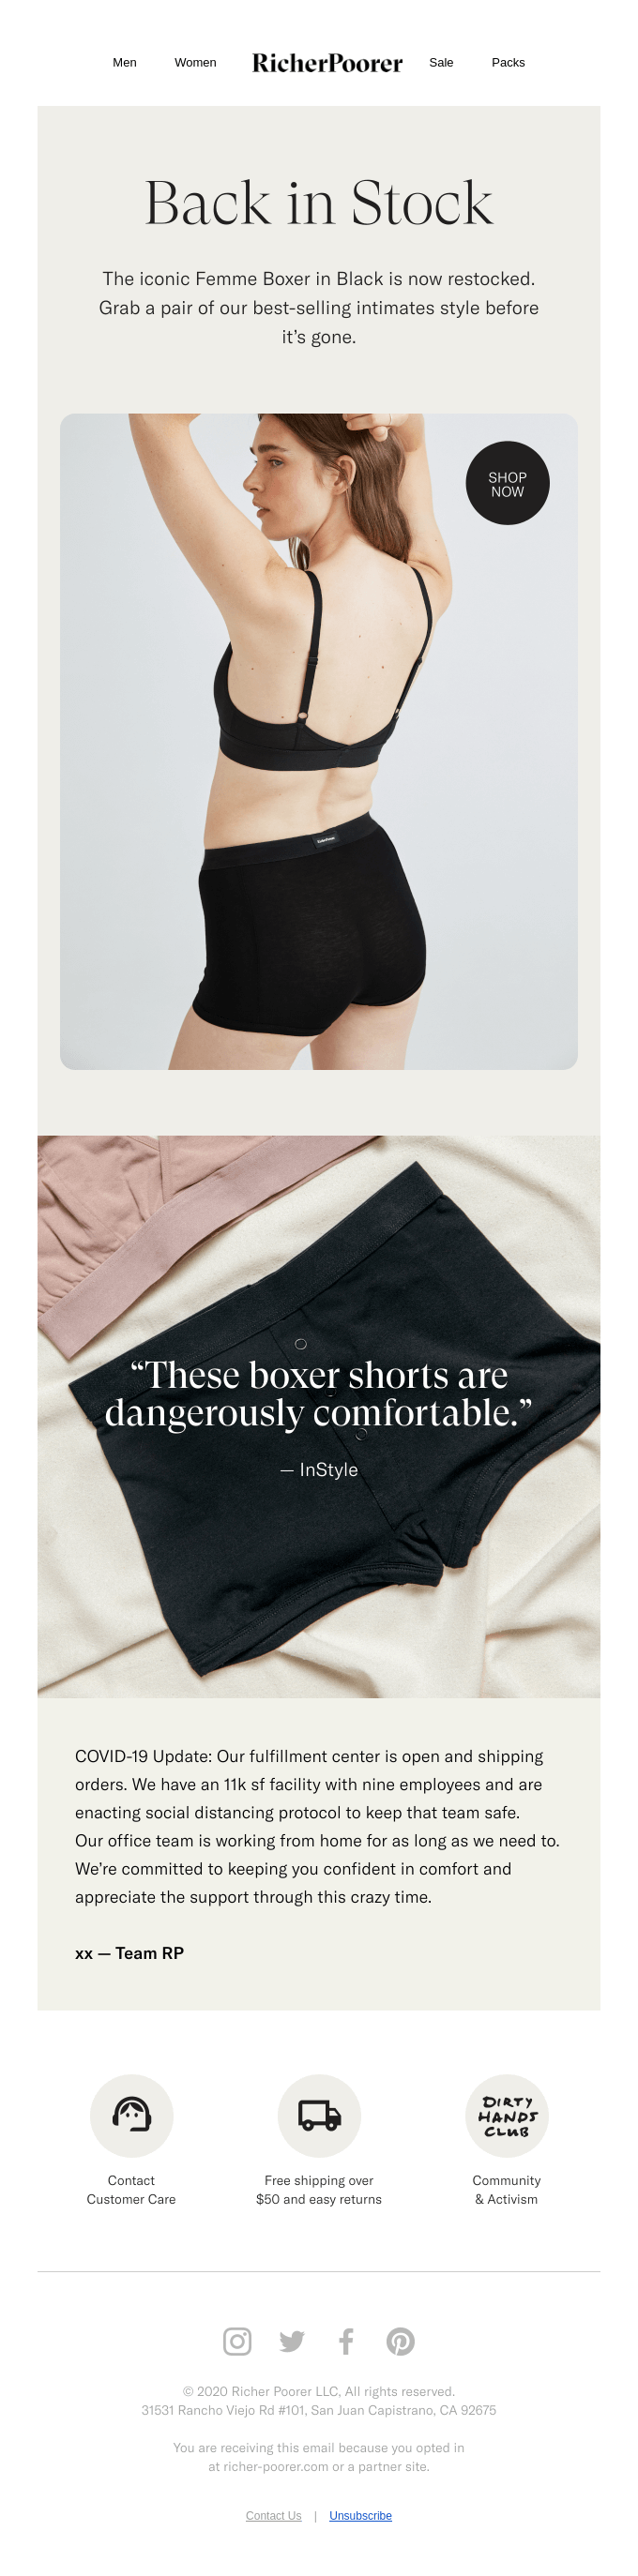 We can't keep this Boxer in Stock